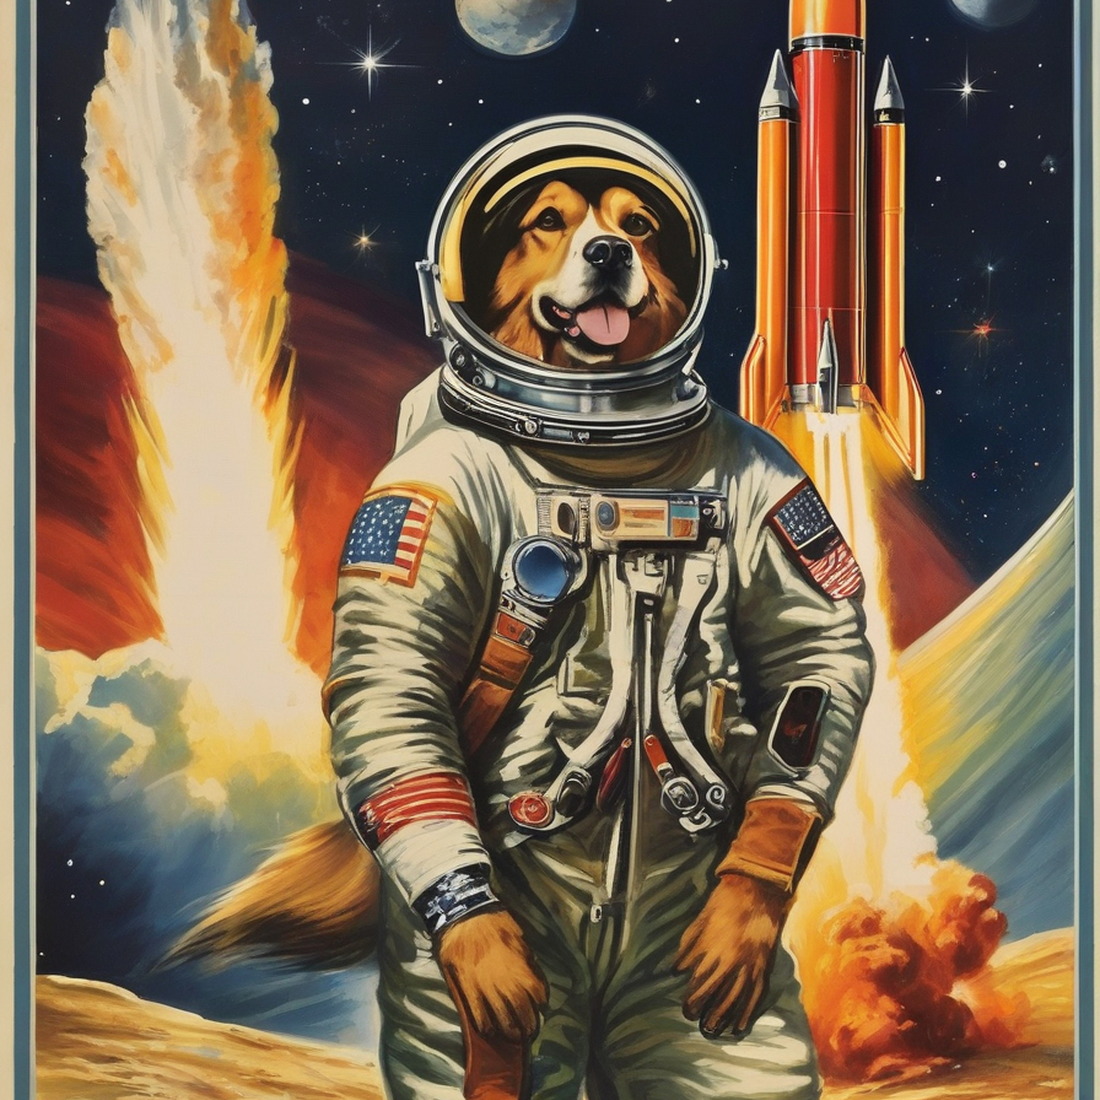 AI: dogs in space, USA, rockets, hero, recruitment poster